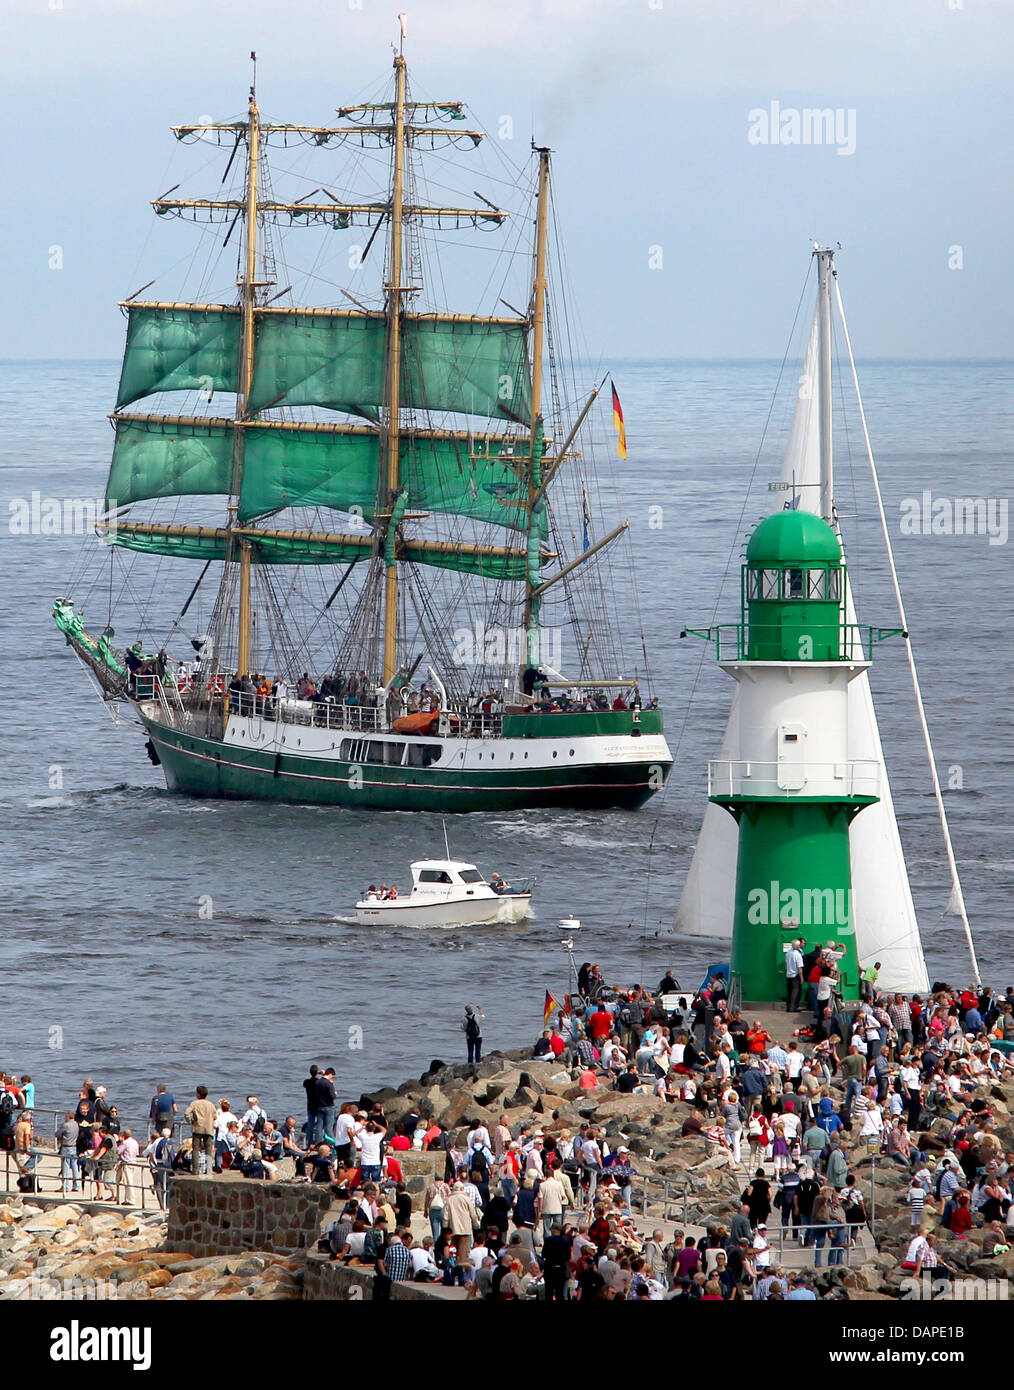 Sailing ships go to sea during a cruising race initiated as part of the 21st Hanse Sail in Warnemuende at the Baltic Sea, Germany, 13 August 2011. About 250 traditional and historic ships from the whole worls have gathered for the maritime spectacle in Germany. Photo: Bernd Wuestneck Stock Photo